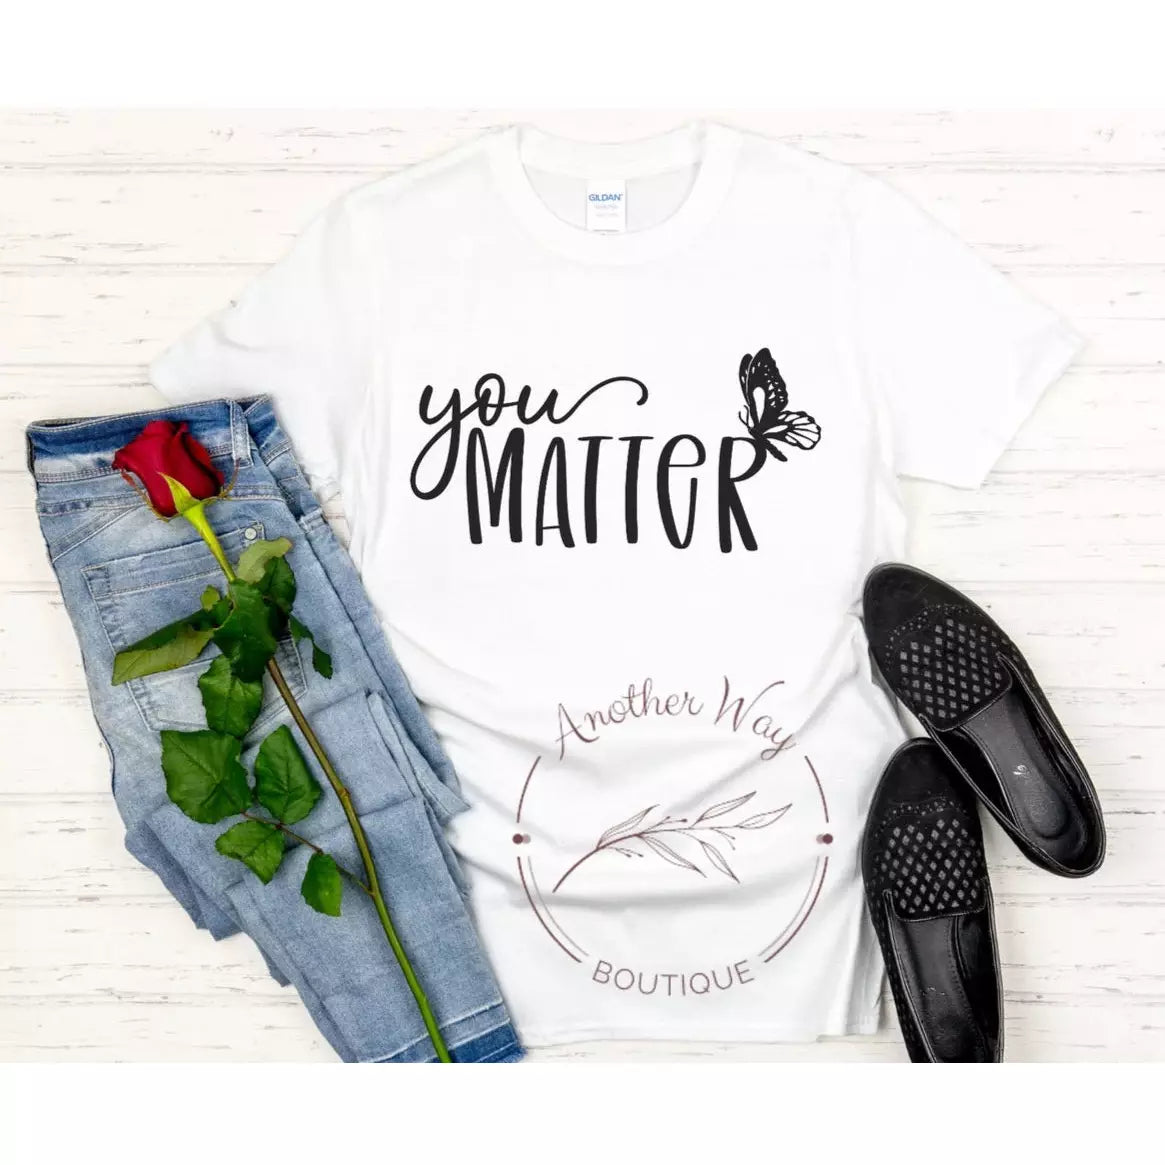 “You matter” - Another Way Boutique